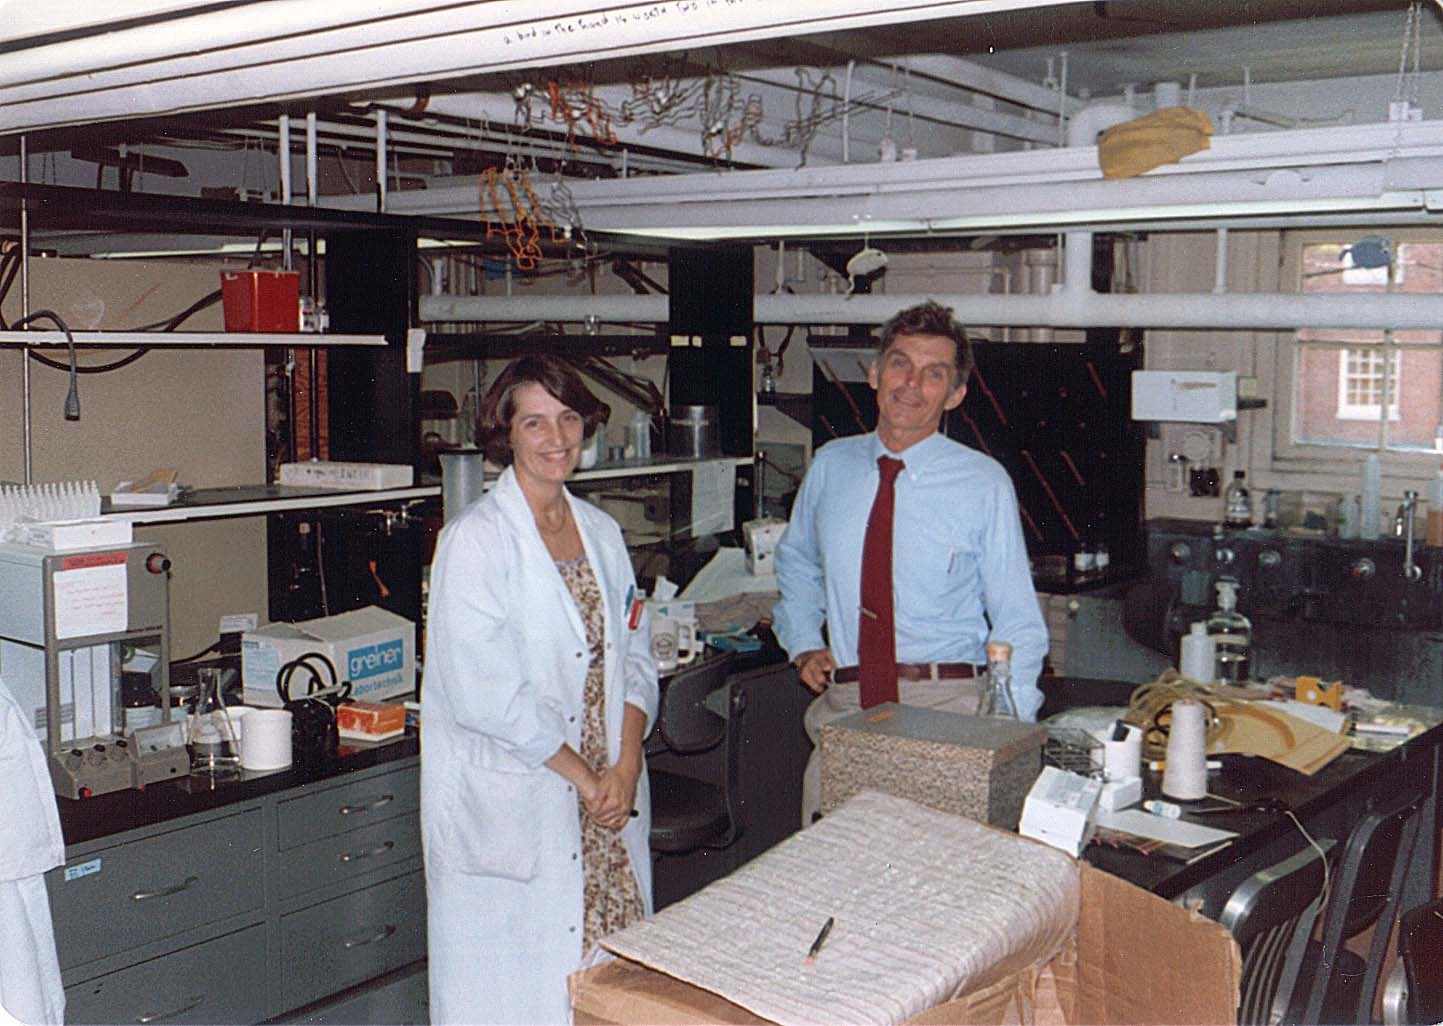 Potter and Mushinski standing in the lab